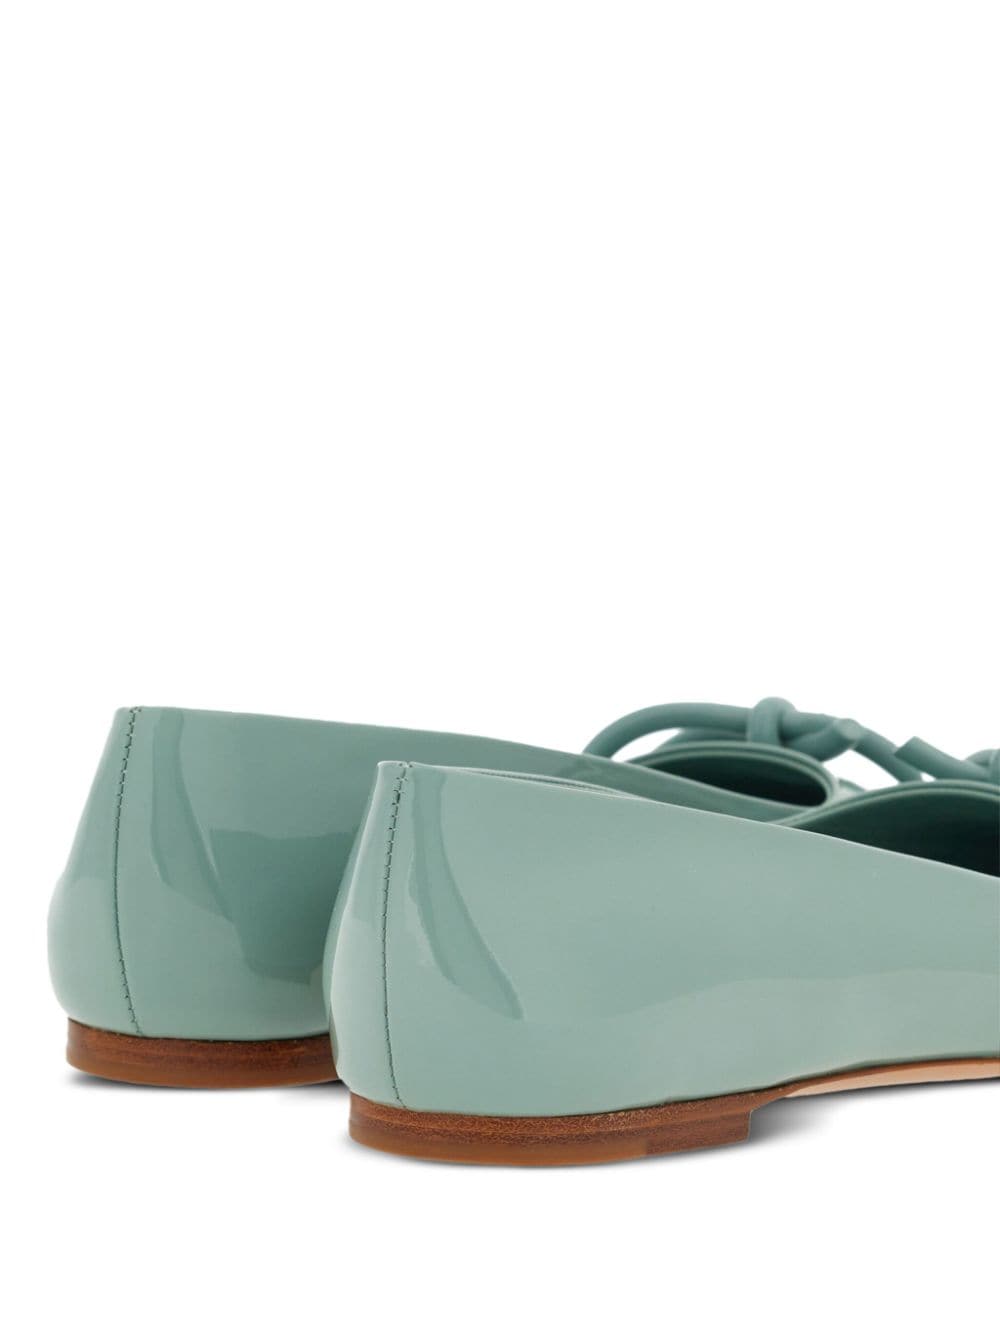 Shop Ferragamo Bow-detailing Leather Ballerina Shoes In Green